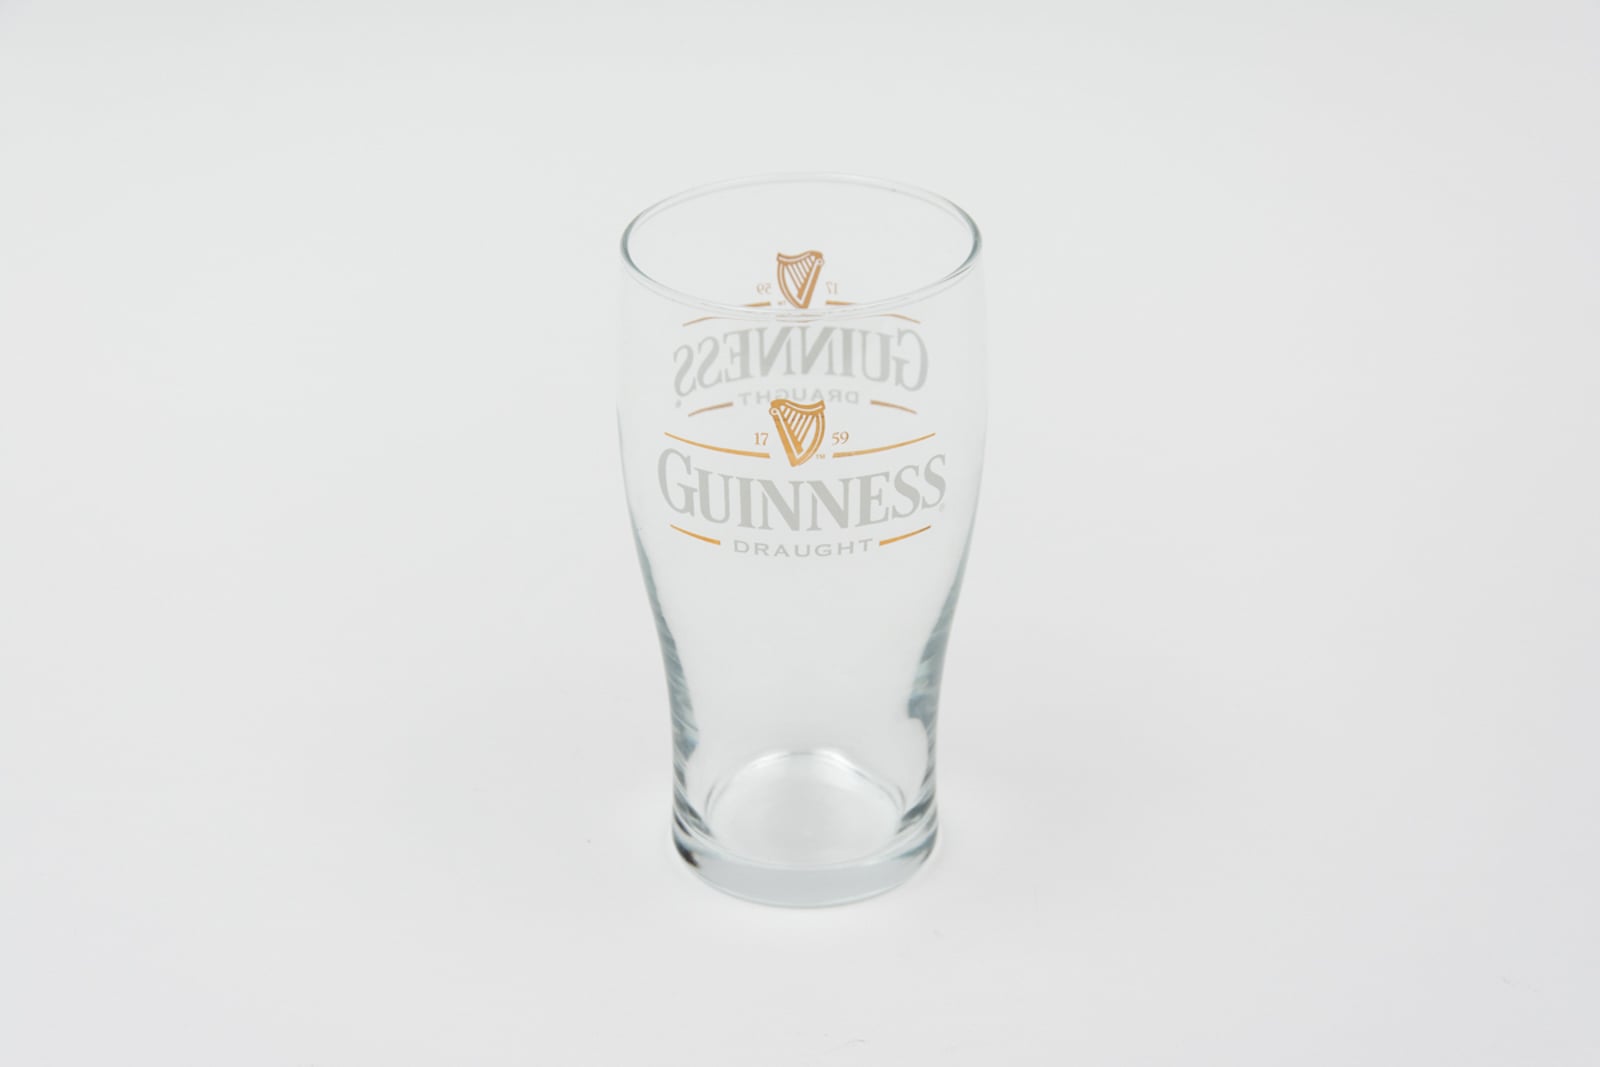 Guinness Draught Imperial Pint Glassware